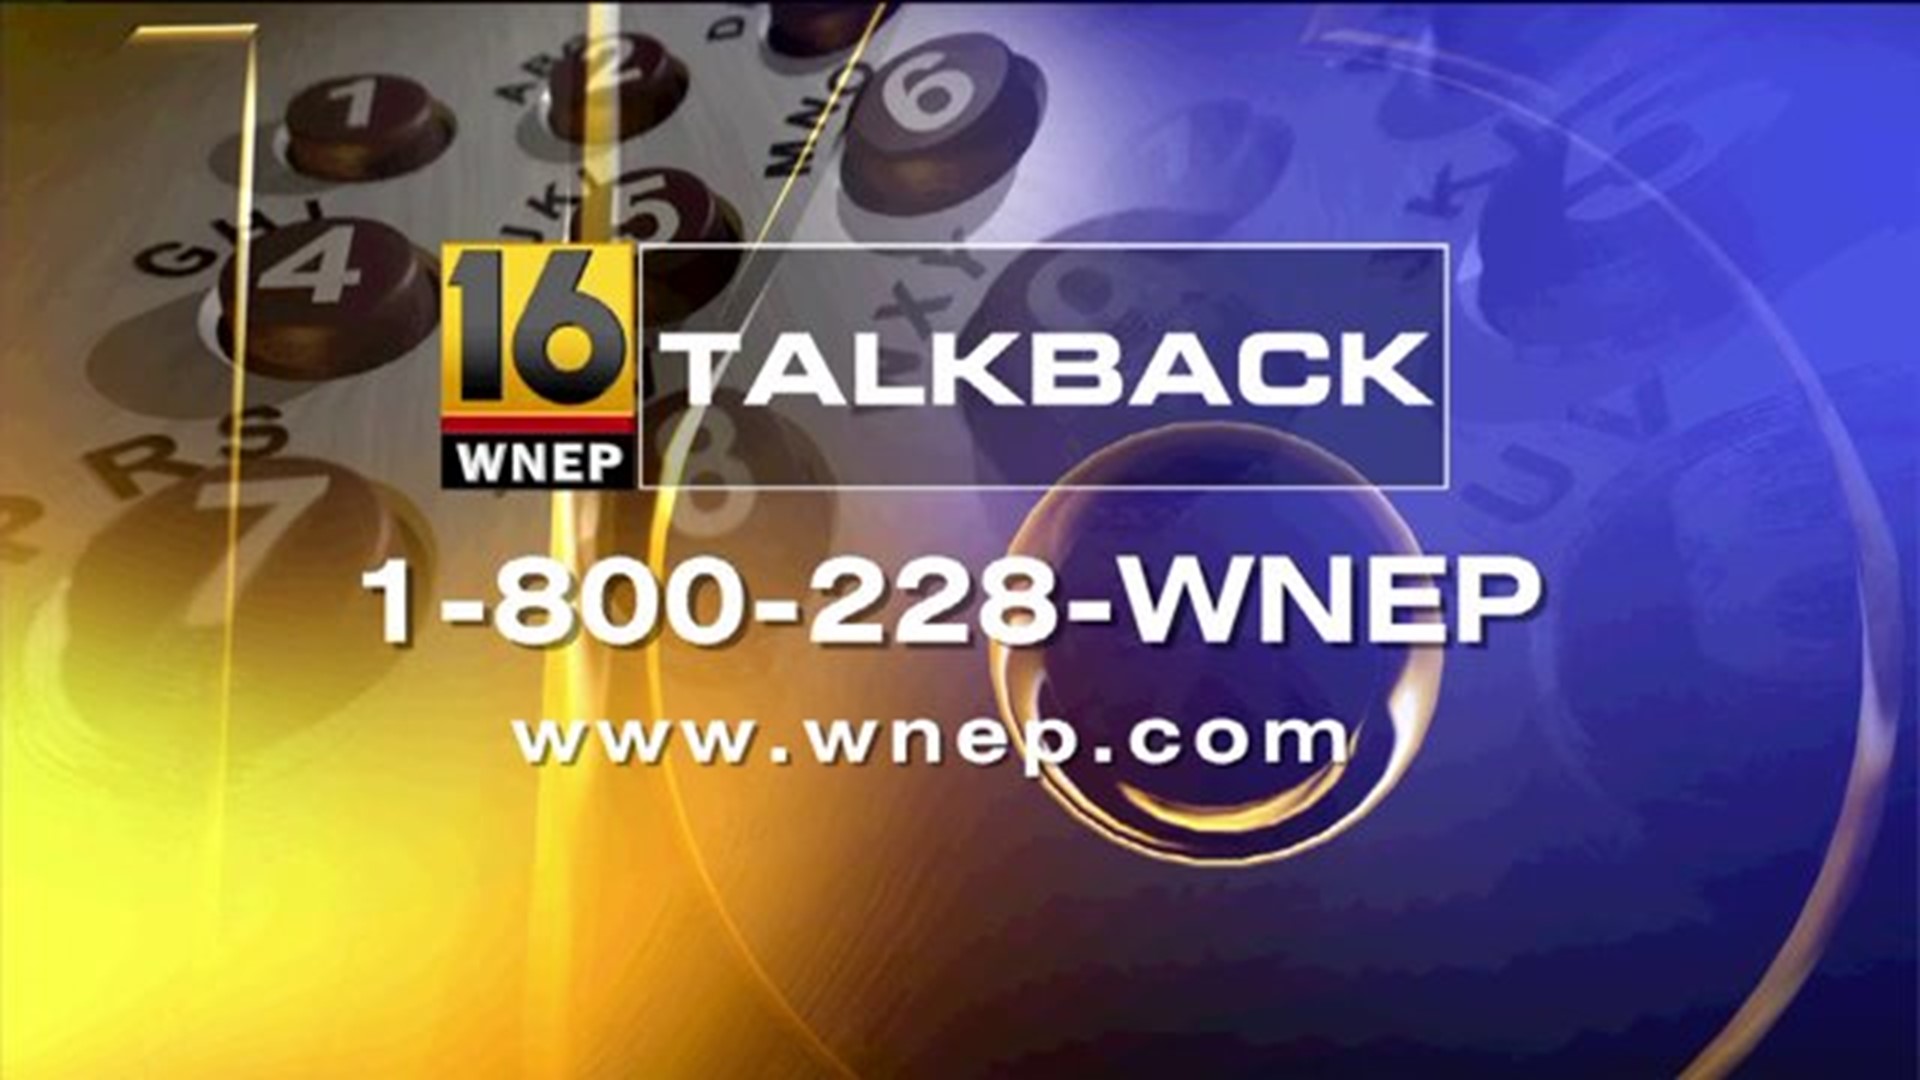 Tornadoes Are a Hot Topic of Talkback